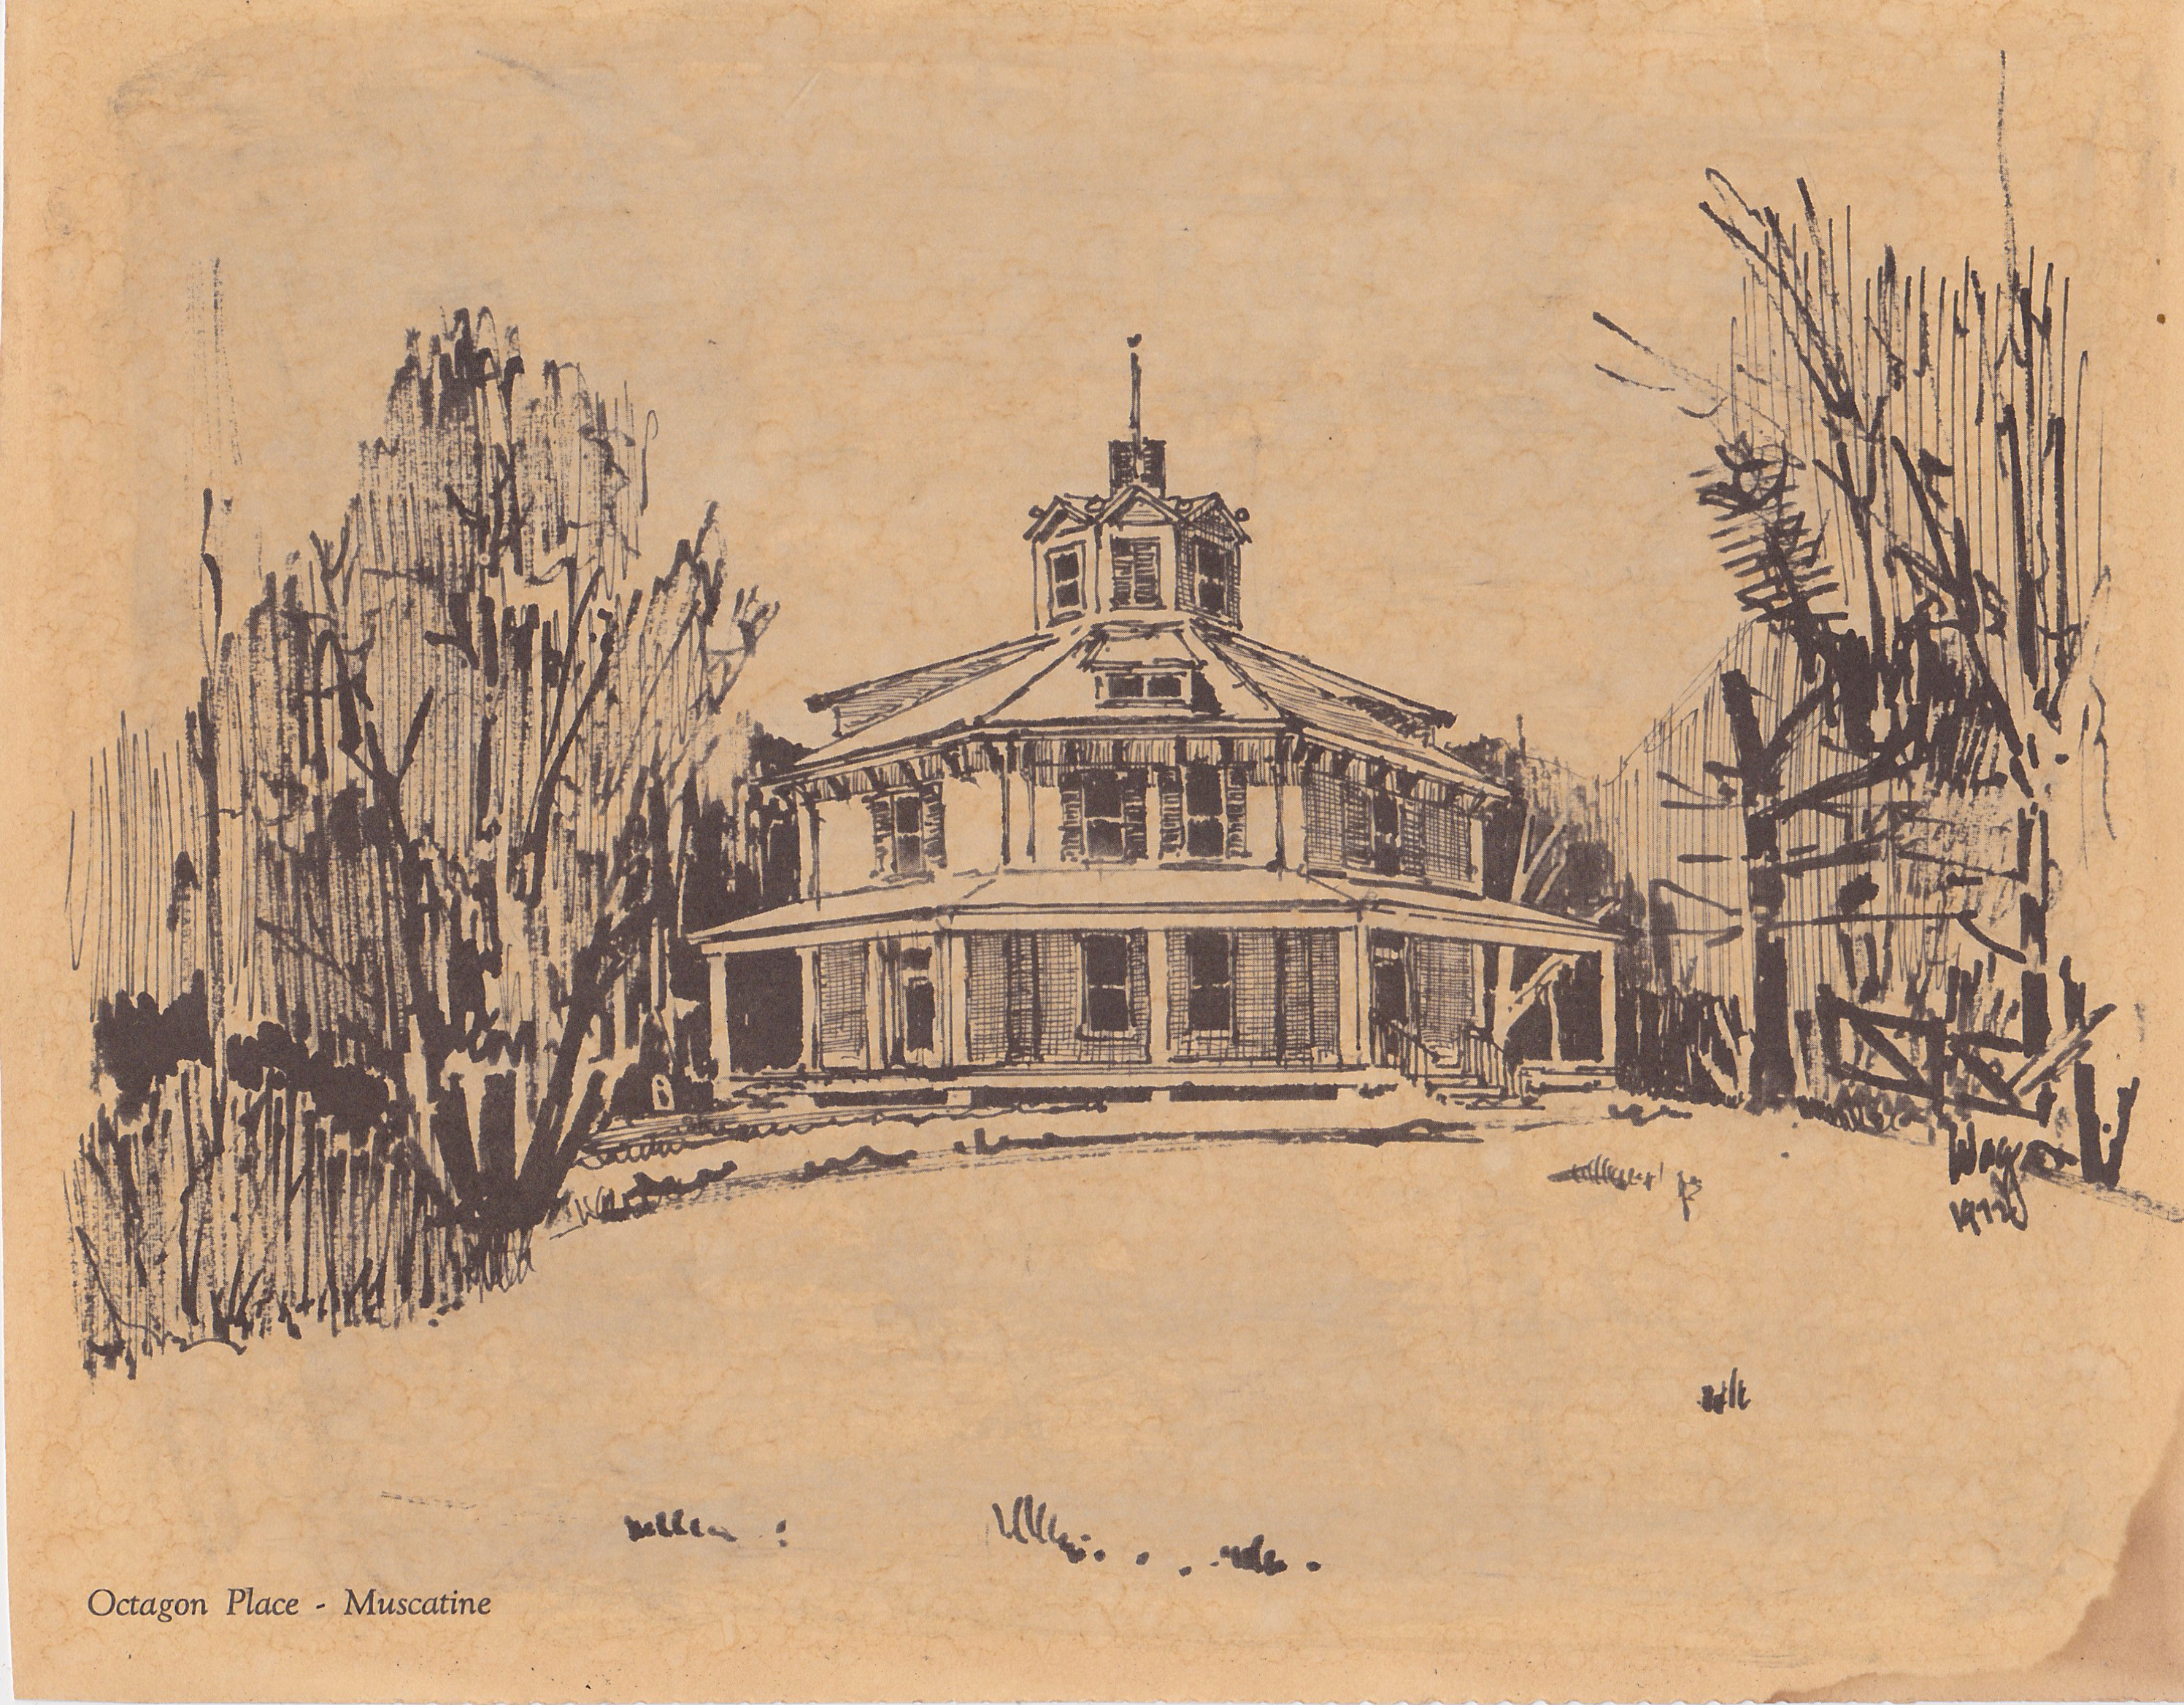 Drawing of Octagon Place, Muscatine, IA from a 1930s calendar